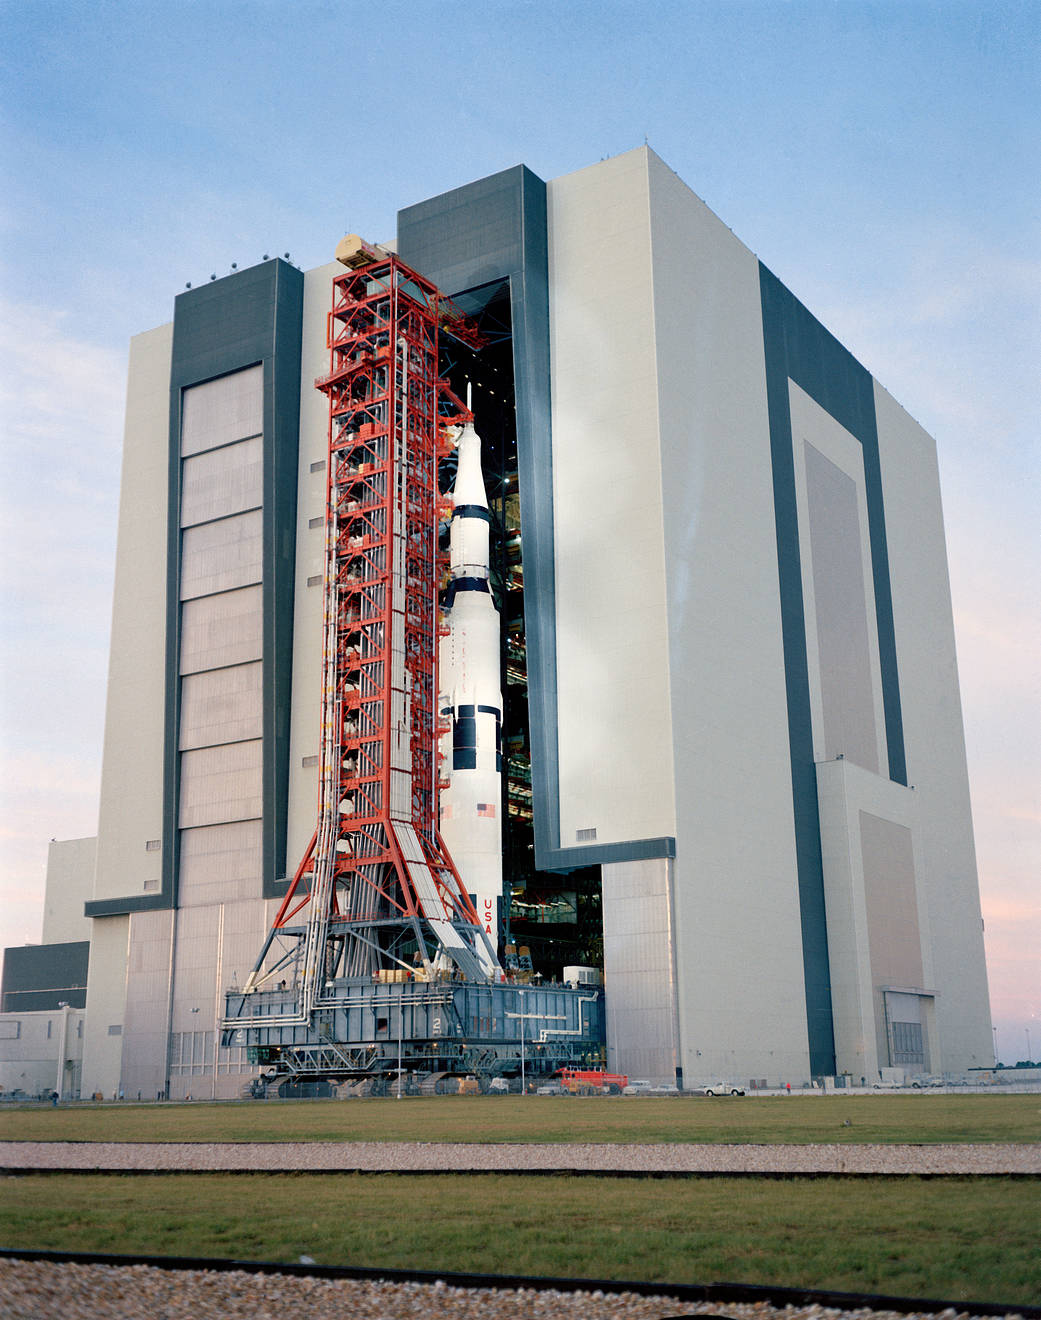 A ground level view at Launch Complex 39, Kennedy Space Center (KSC), showing the Apollo 14 (Spacecraft 110/Lunar Module 8/Satur